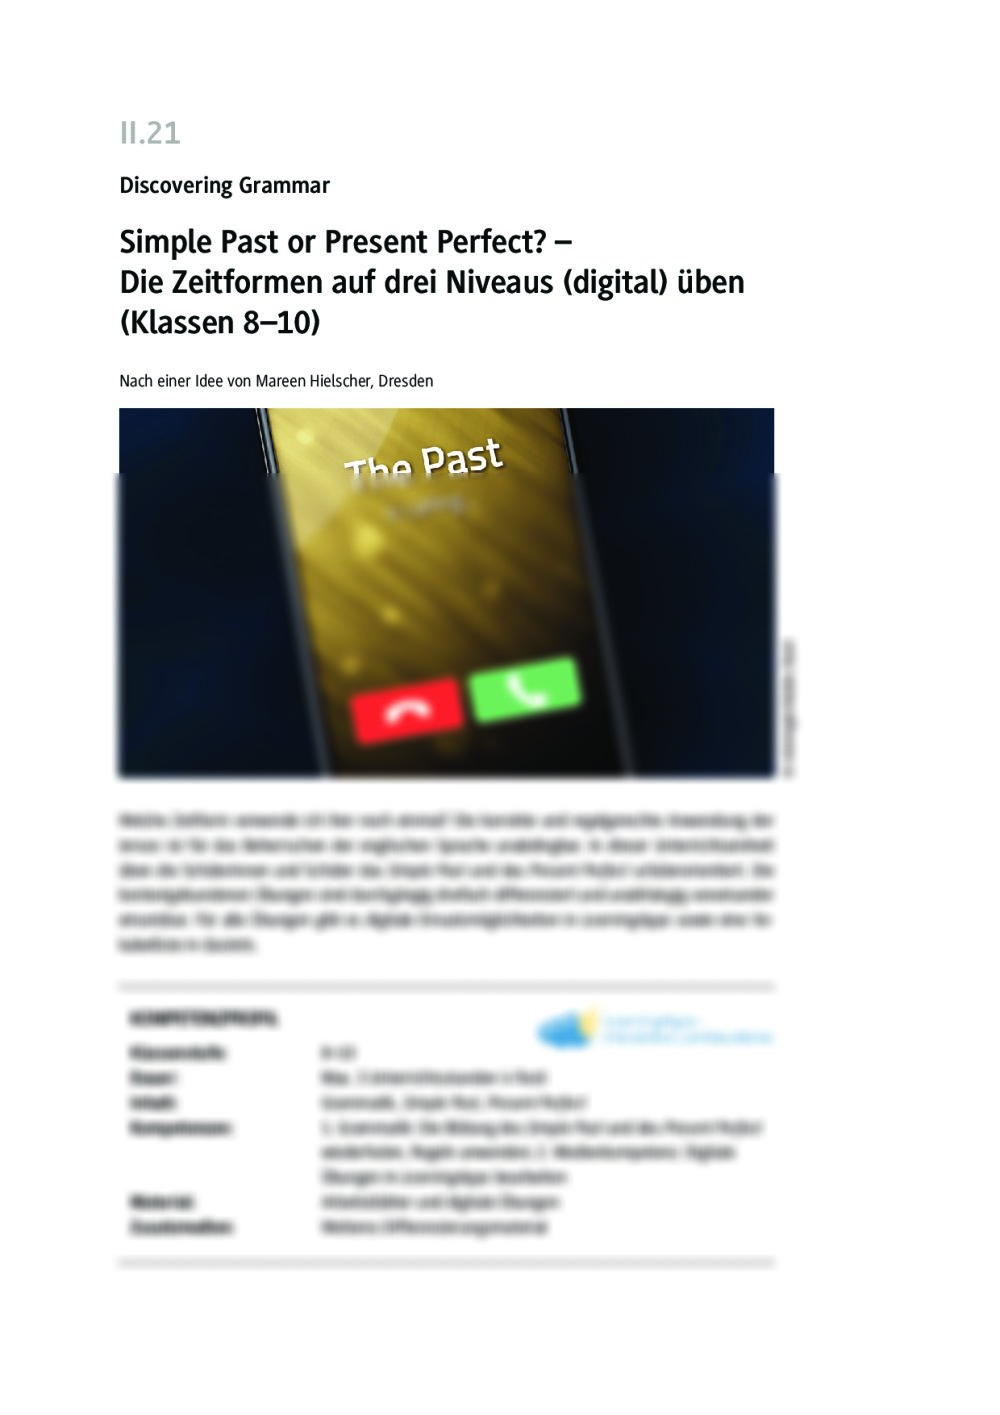 Simple Past or Present Perfect? - Seite 1